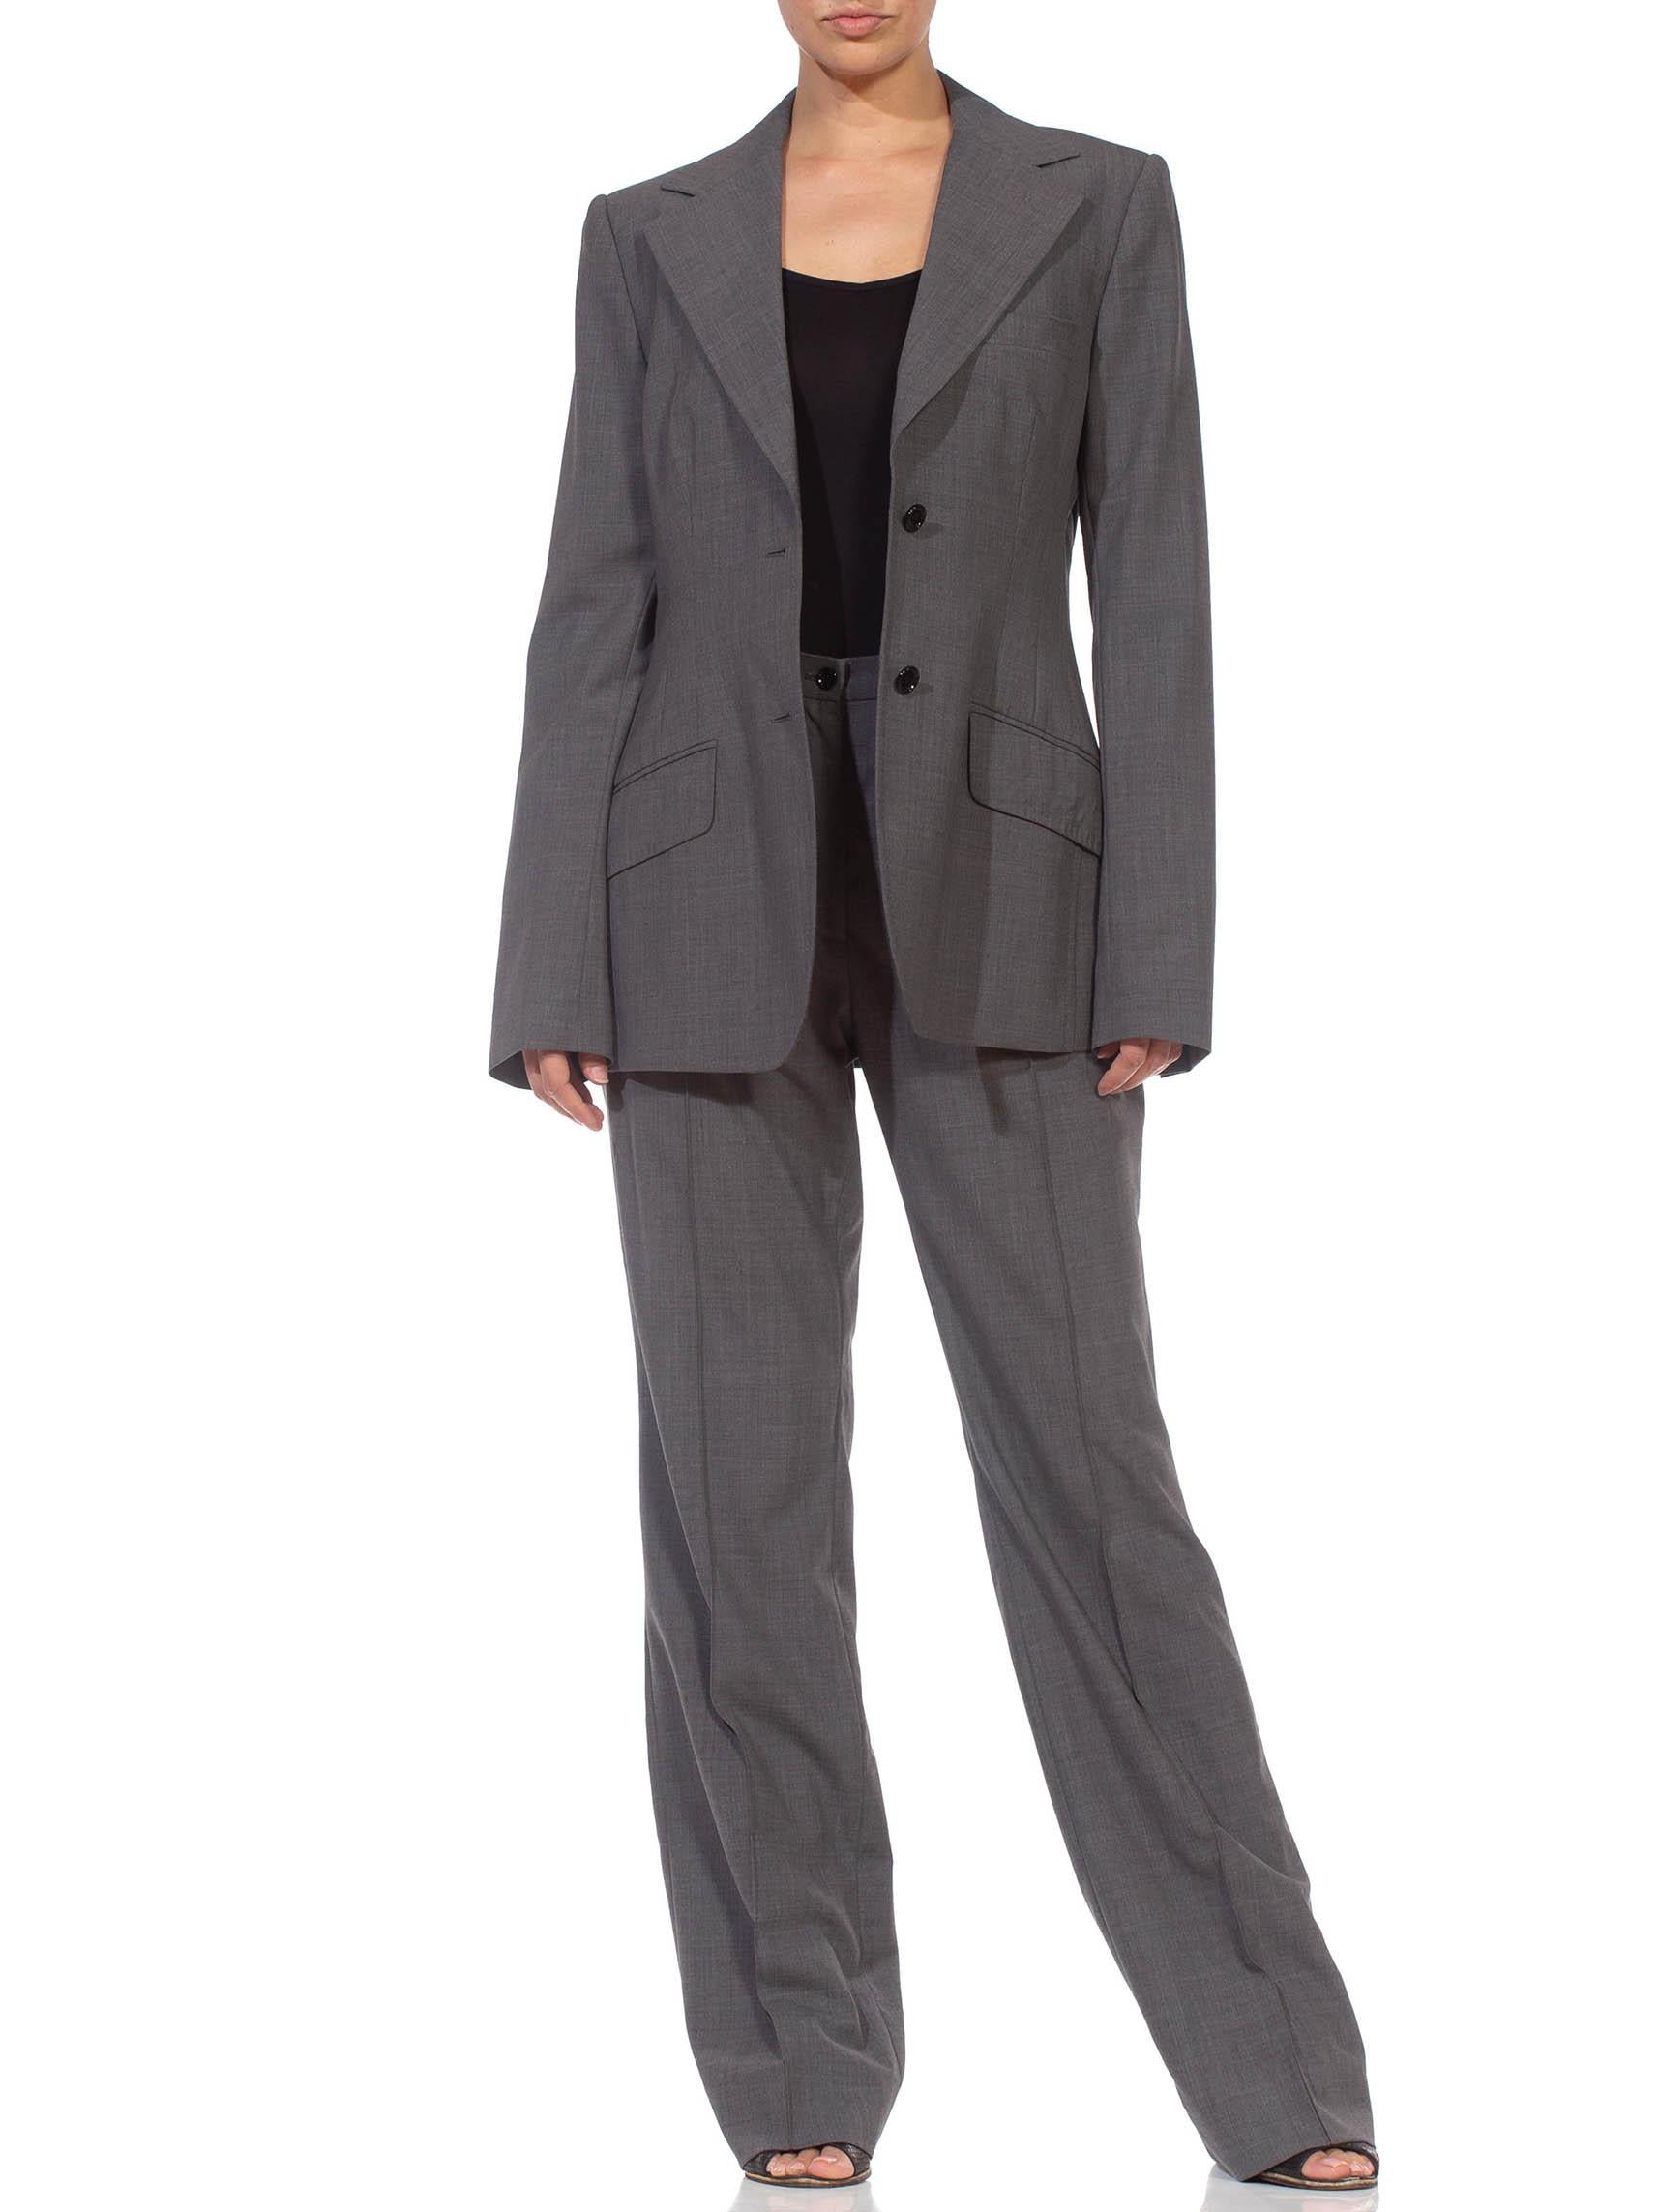 Women's 1990S DOLCE & GABBANA Grey Wool Blend Single Breasted Pant Suit For Sale